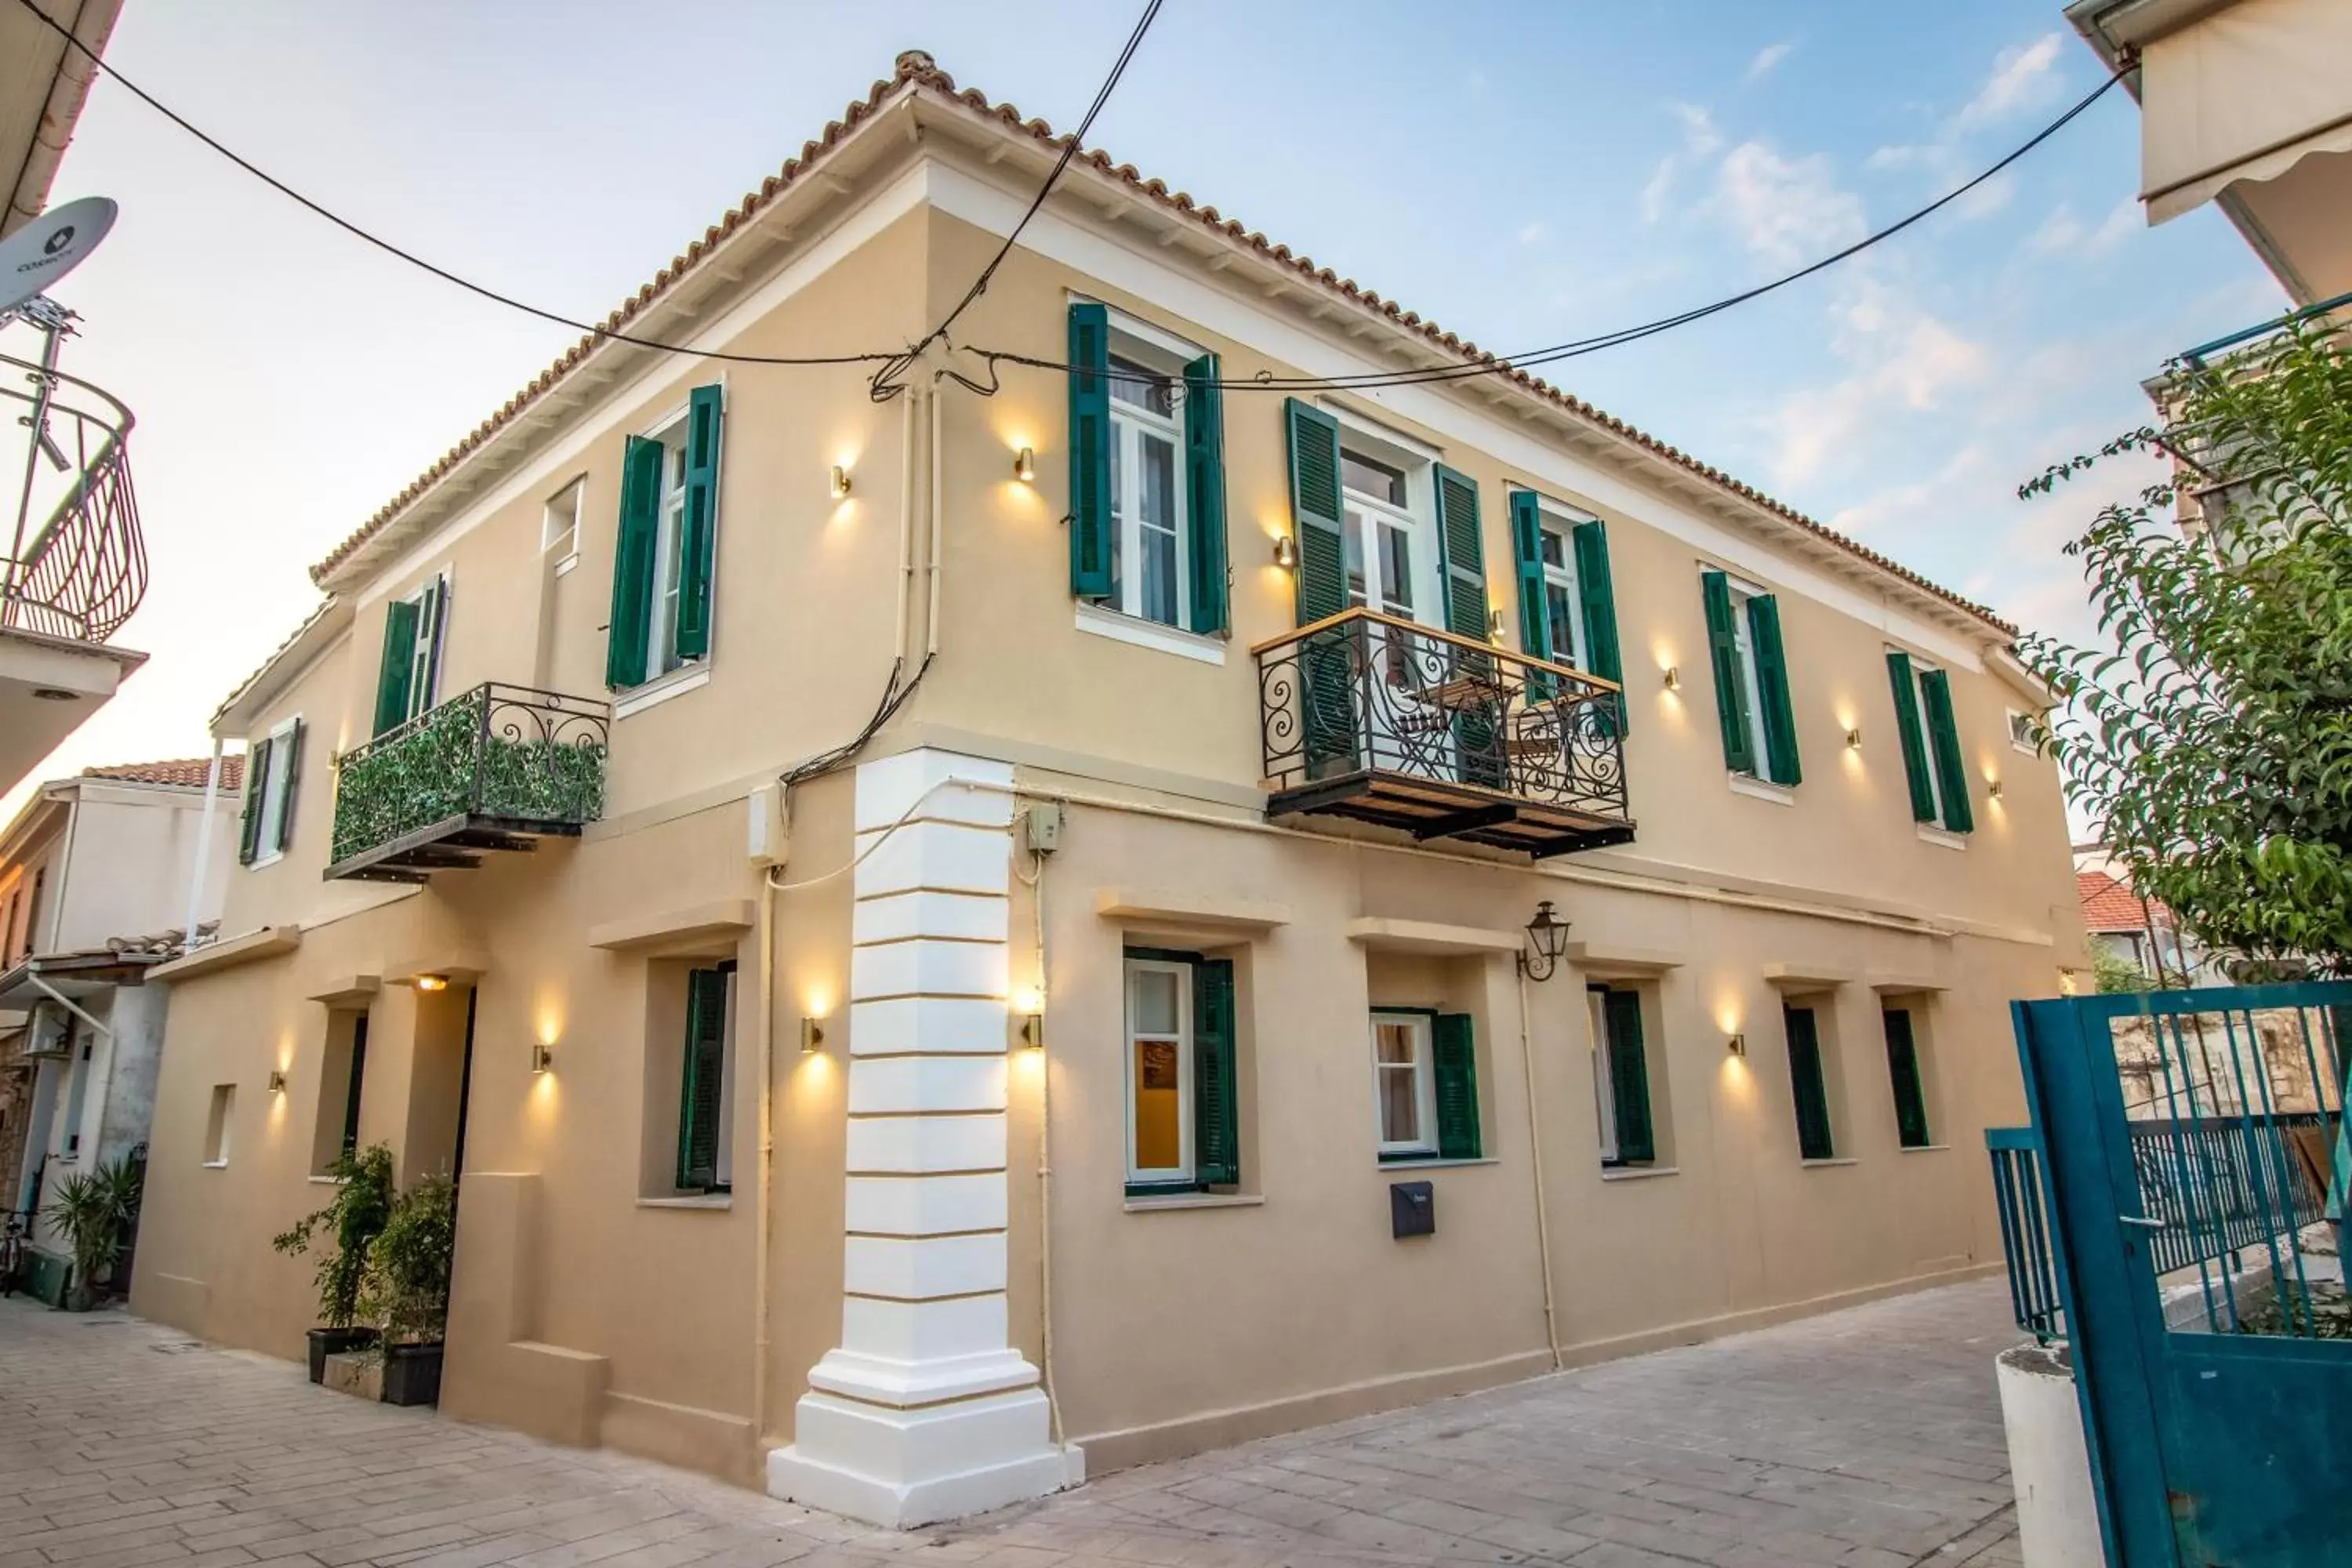 Property Building in Levkosh Apartments at Lefkada's Heart